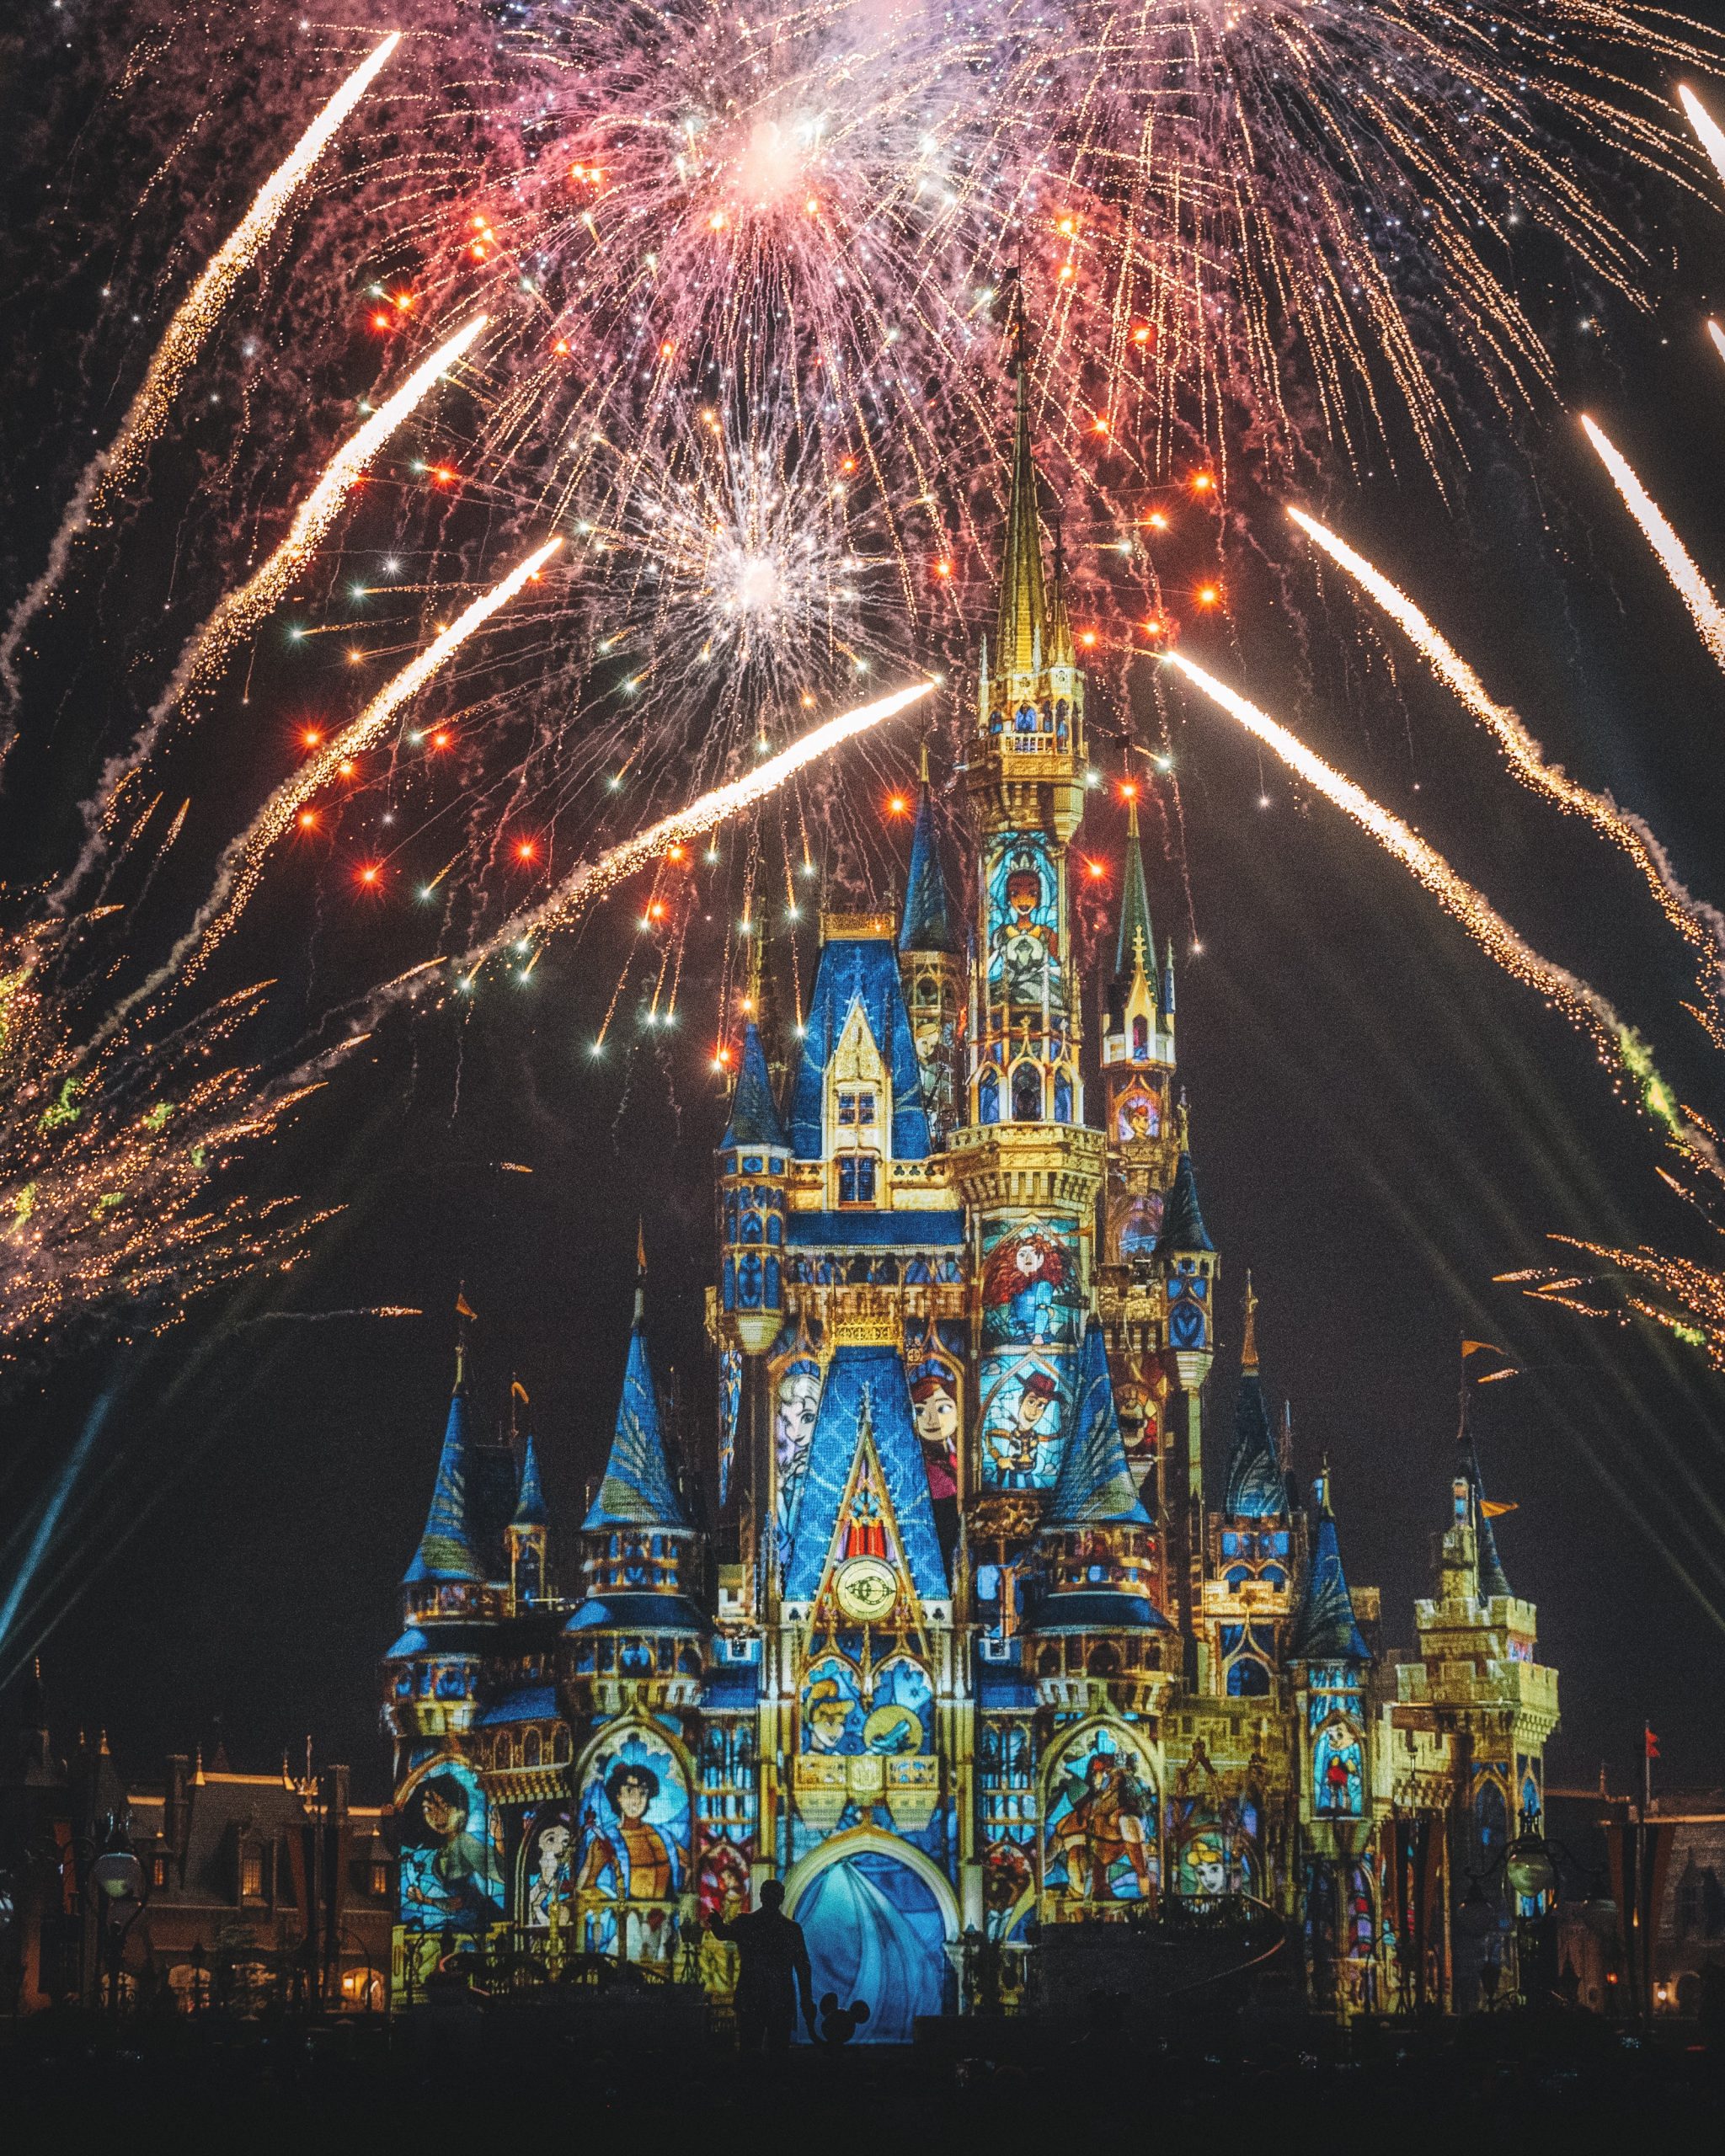 A member of the Melaka state exco claims that Jasin will host the first Disney themed attraction in Asean. Image for illustration only. Image credit: Rick Han via Pexels